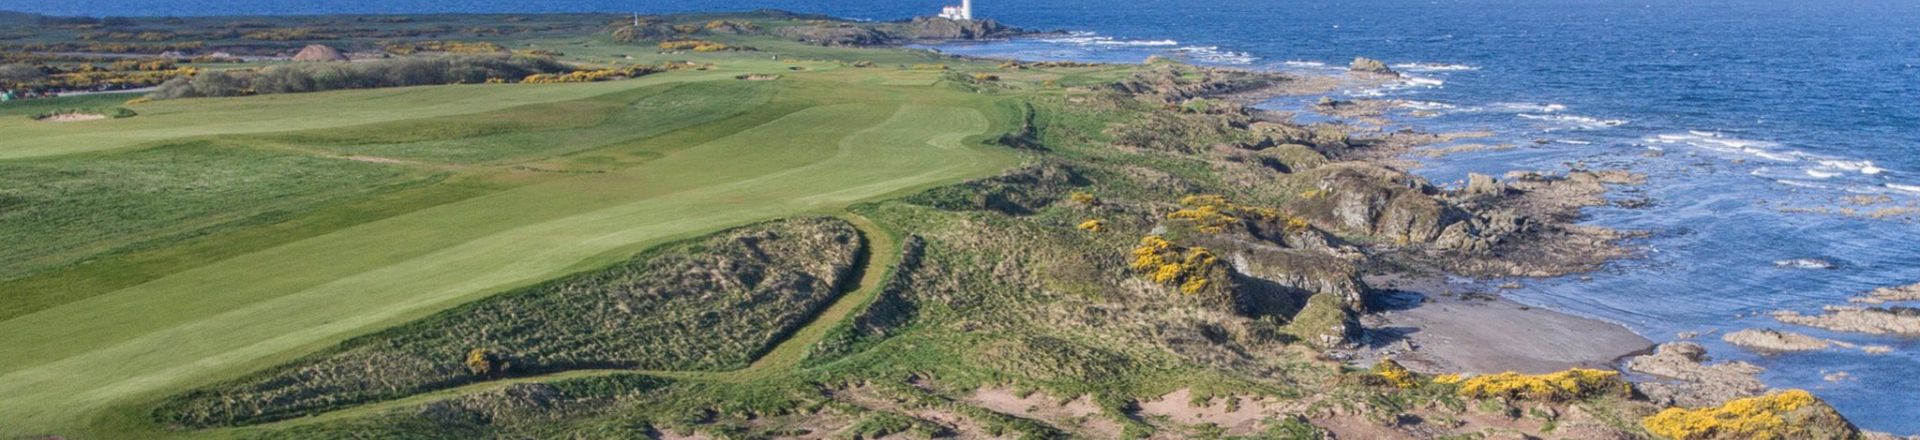 Experience the timeless beauty of King Robert The Bruce Golf Course at Trump Turnberry, Scotland. This image captures the essence of a legendary golfing destination, featuring meticulously crafted fairways against the backdrop of the Scottish landscape.